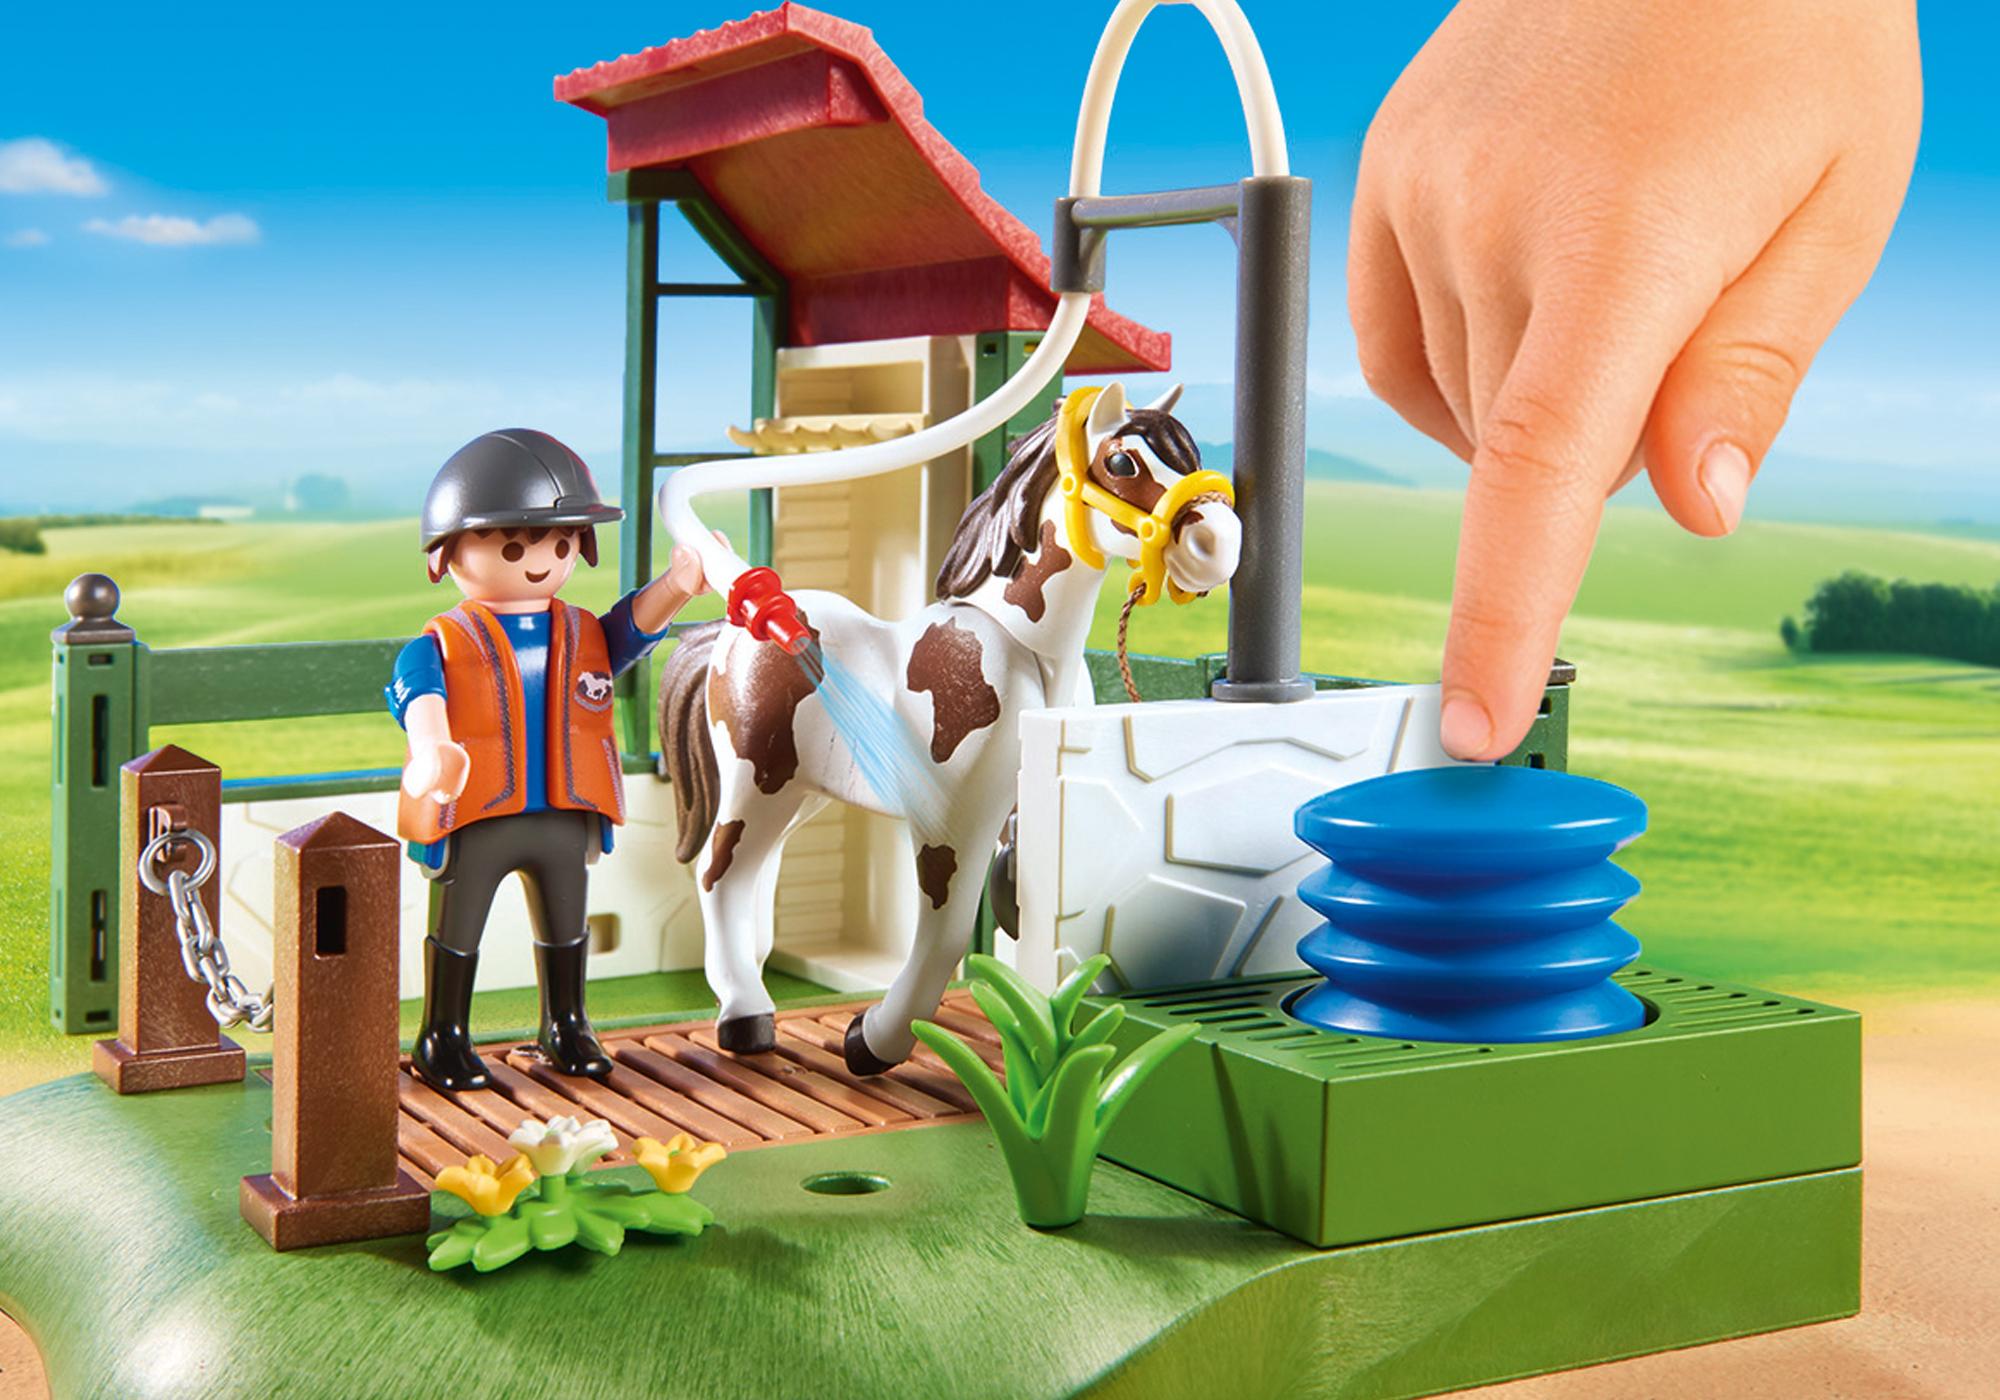 playmobil station lavage chevaux